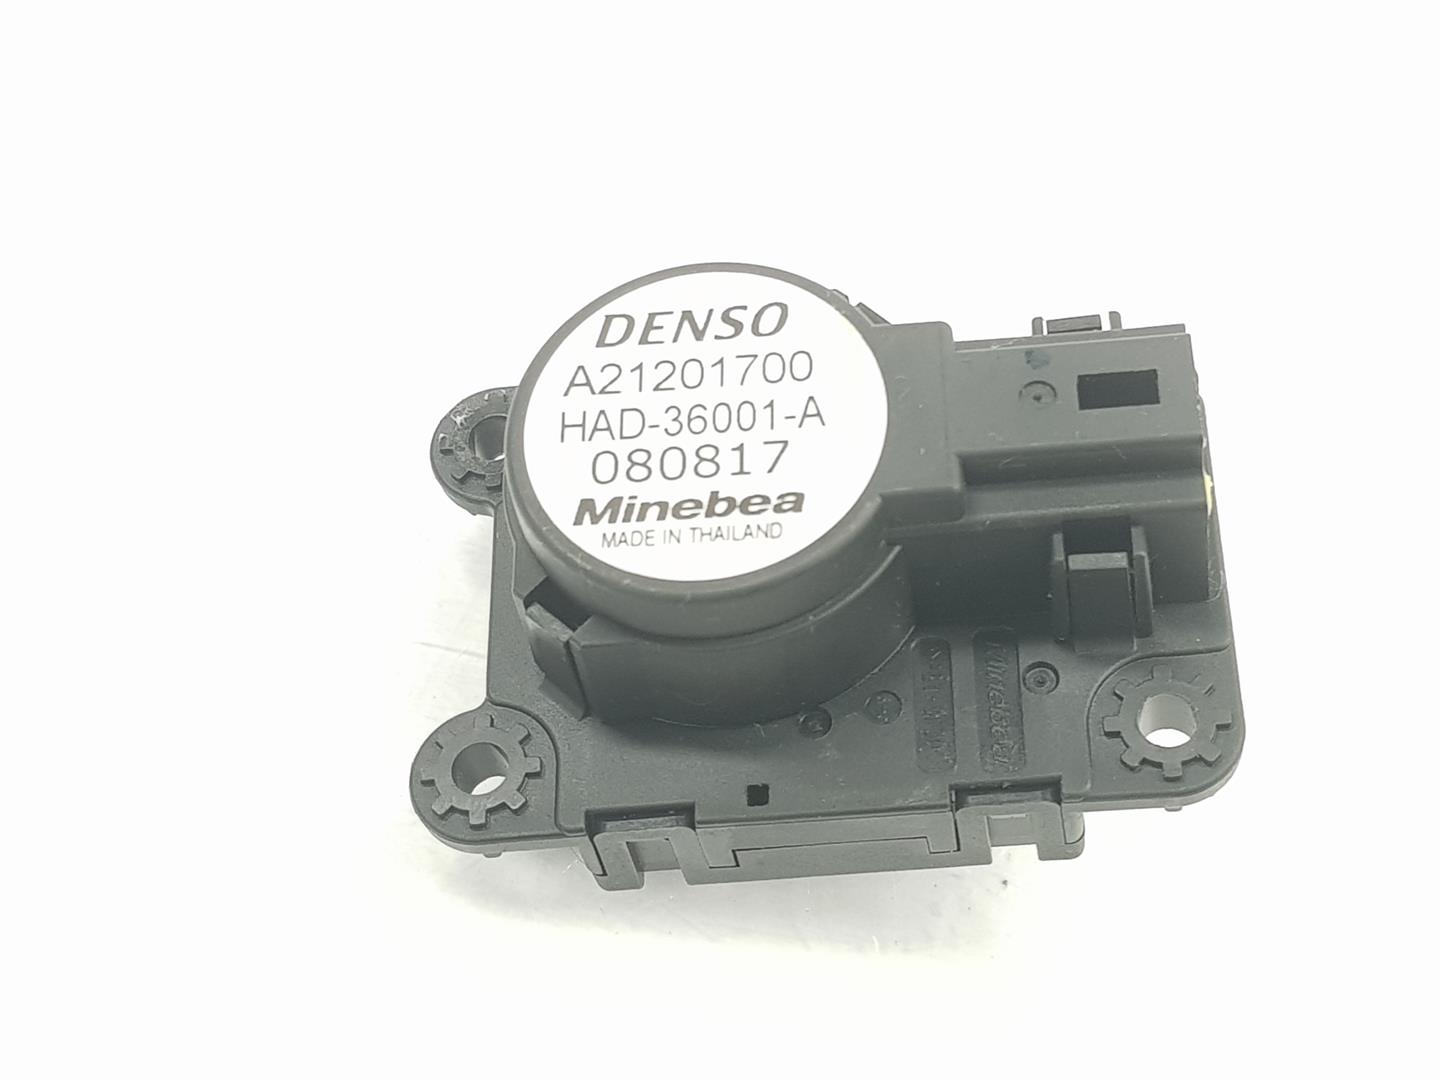 PEUGEOT 3008 SUV (2016-present) Air Conditioner Air Flow Valve Motor A21201700, A21201700 24208556